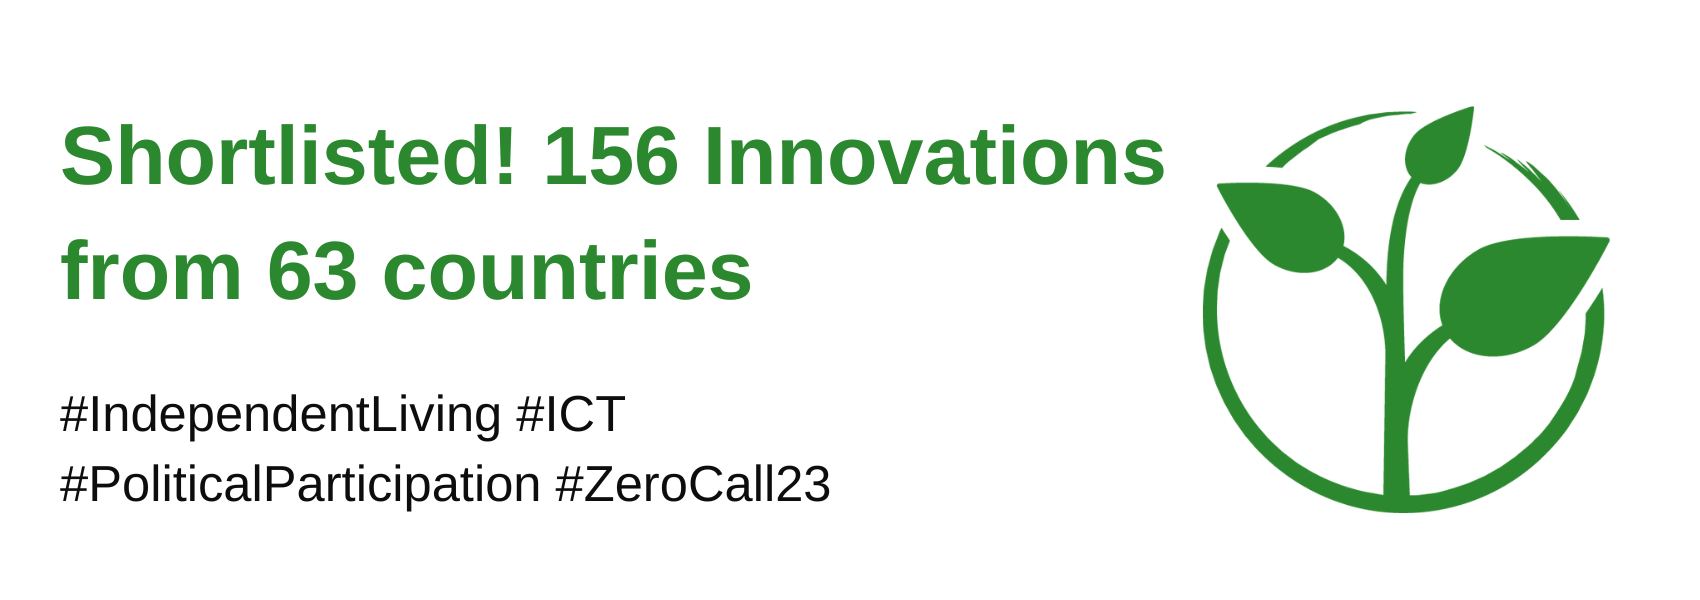 Shortlisted 156 Innovation from 63 Countries, #IndependentLiving #ICT #PoliticalParticipation #ZeroCall23